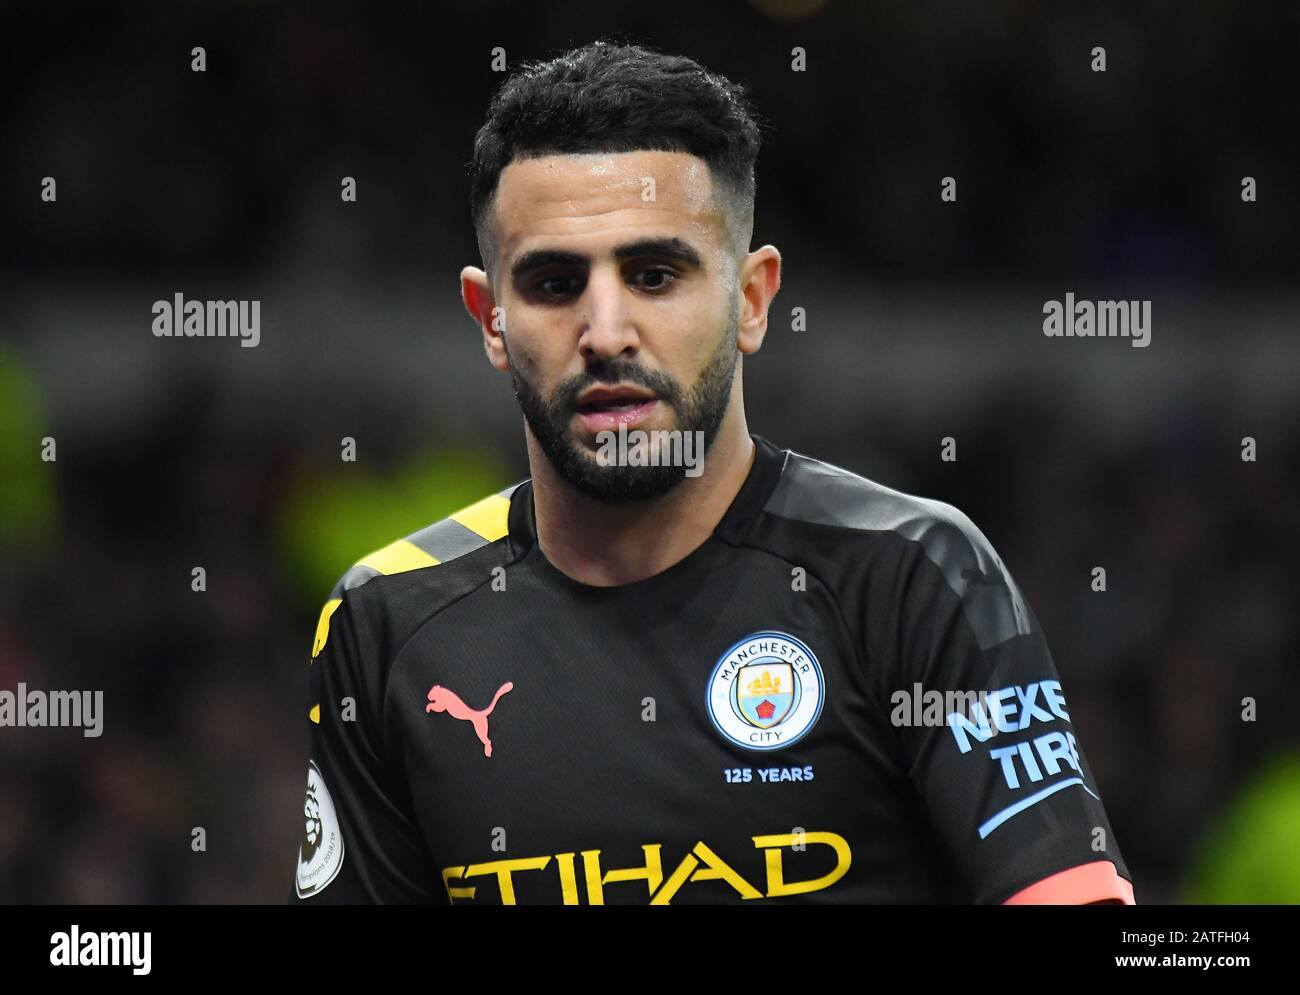 LONDON, ENGLAND - FEBRUARY 2, 2020: Riyad Mahrez of City pictured during the 2019/20 Premier League game between Tottenham Hotspur FC and Manchester City FC at Tottenham Hotspur Stadium. Stock Photo